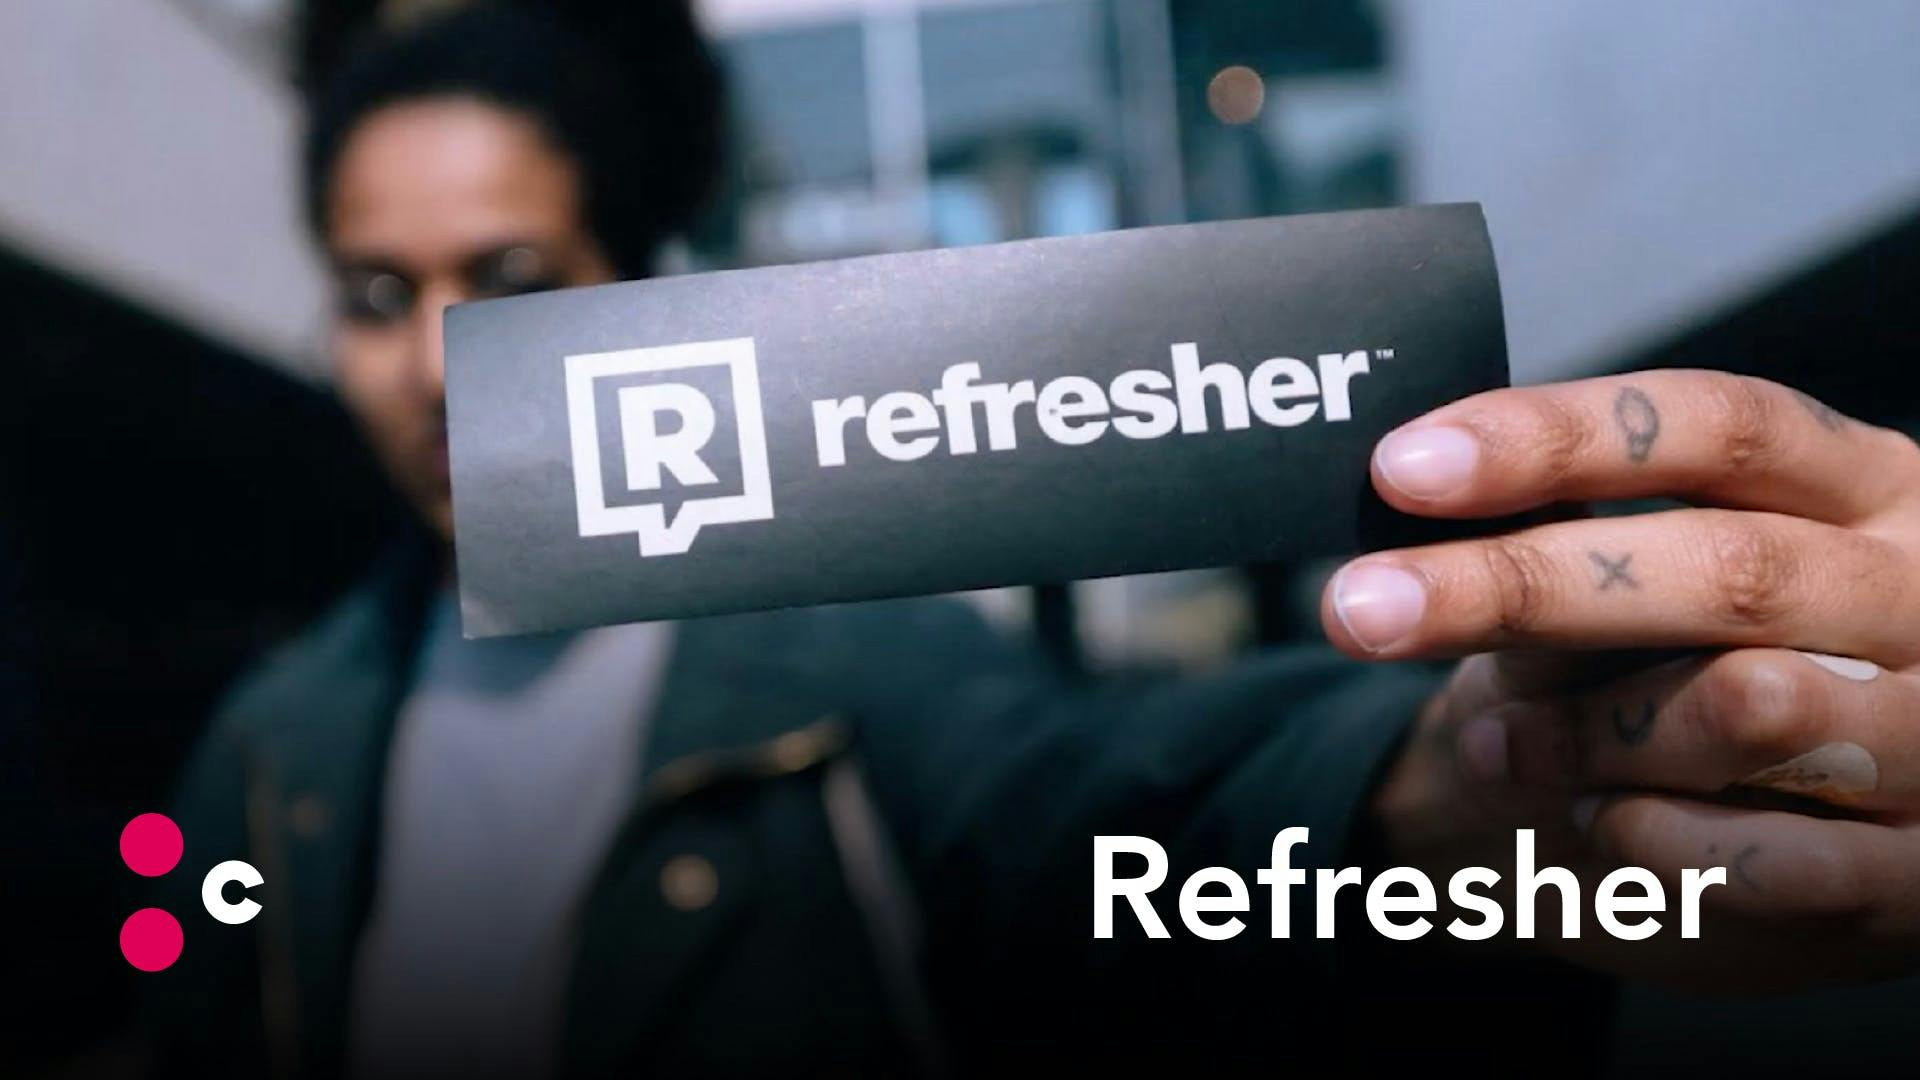 Refresher raises a nearly €2 million investment and plans to enter a new market 